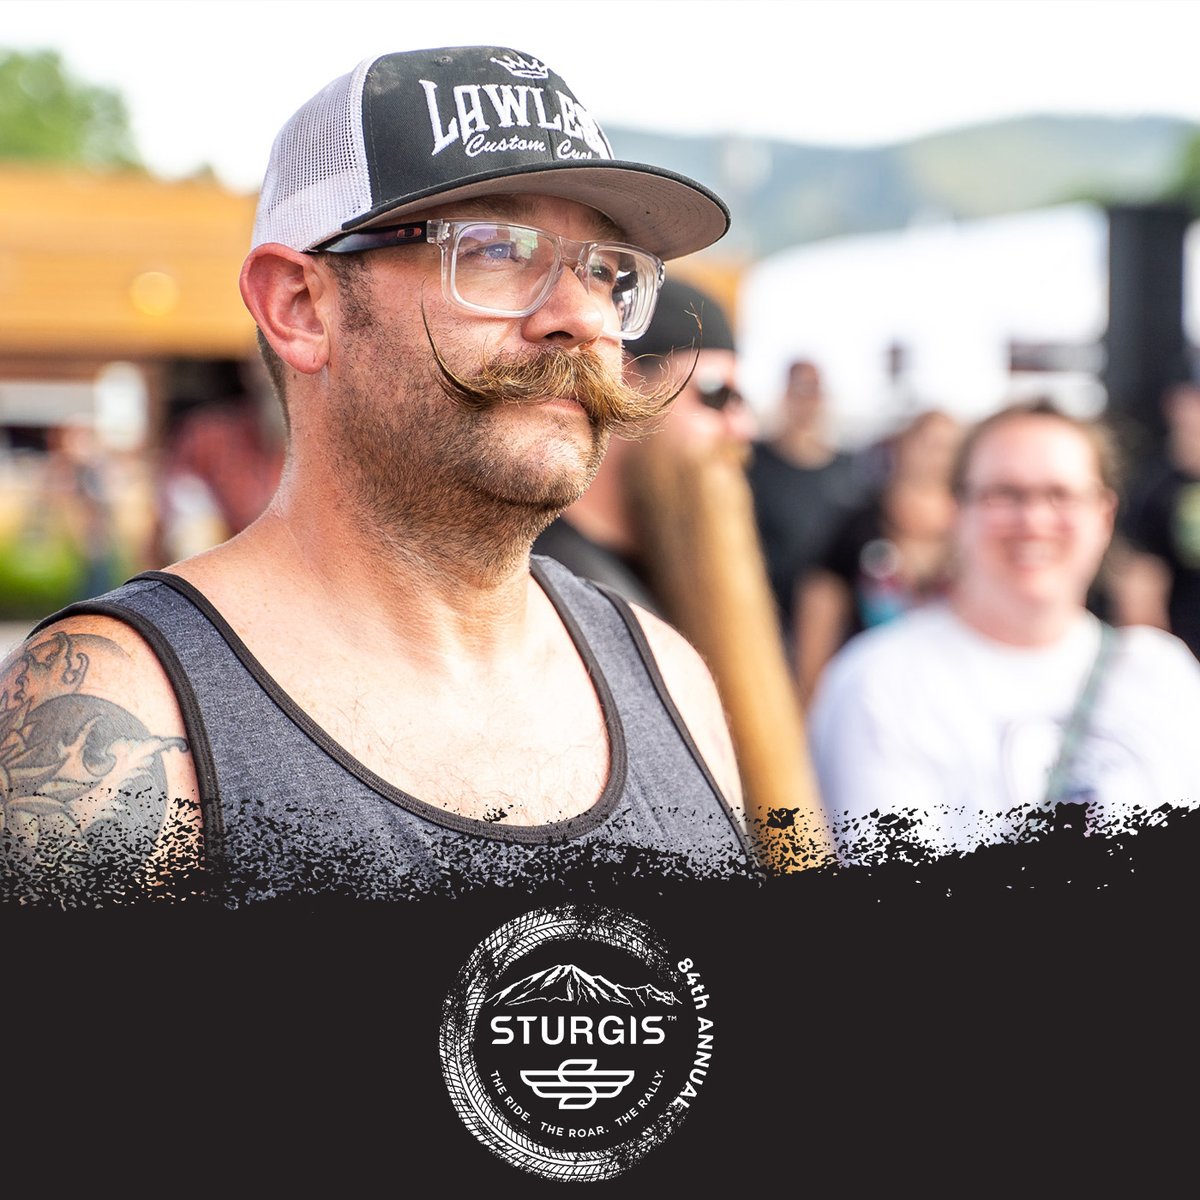 Now that's a stache 🥸 - #sturgis #sturgisrally